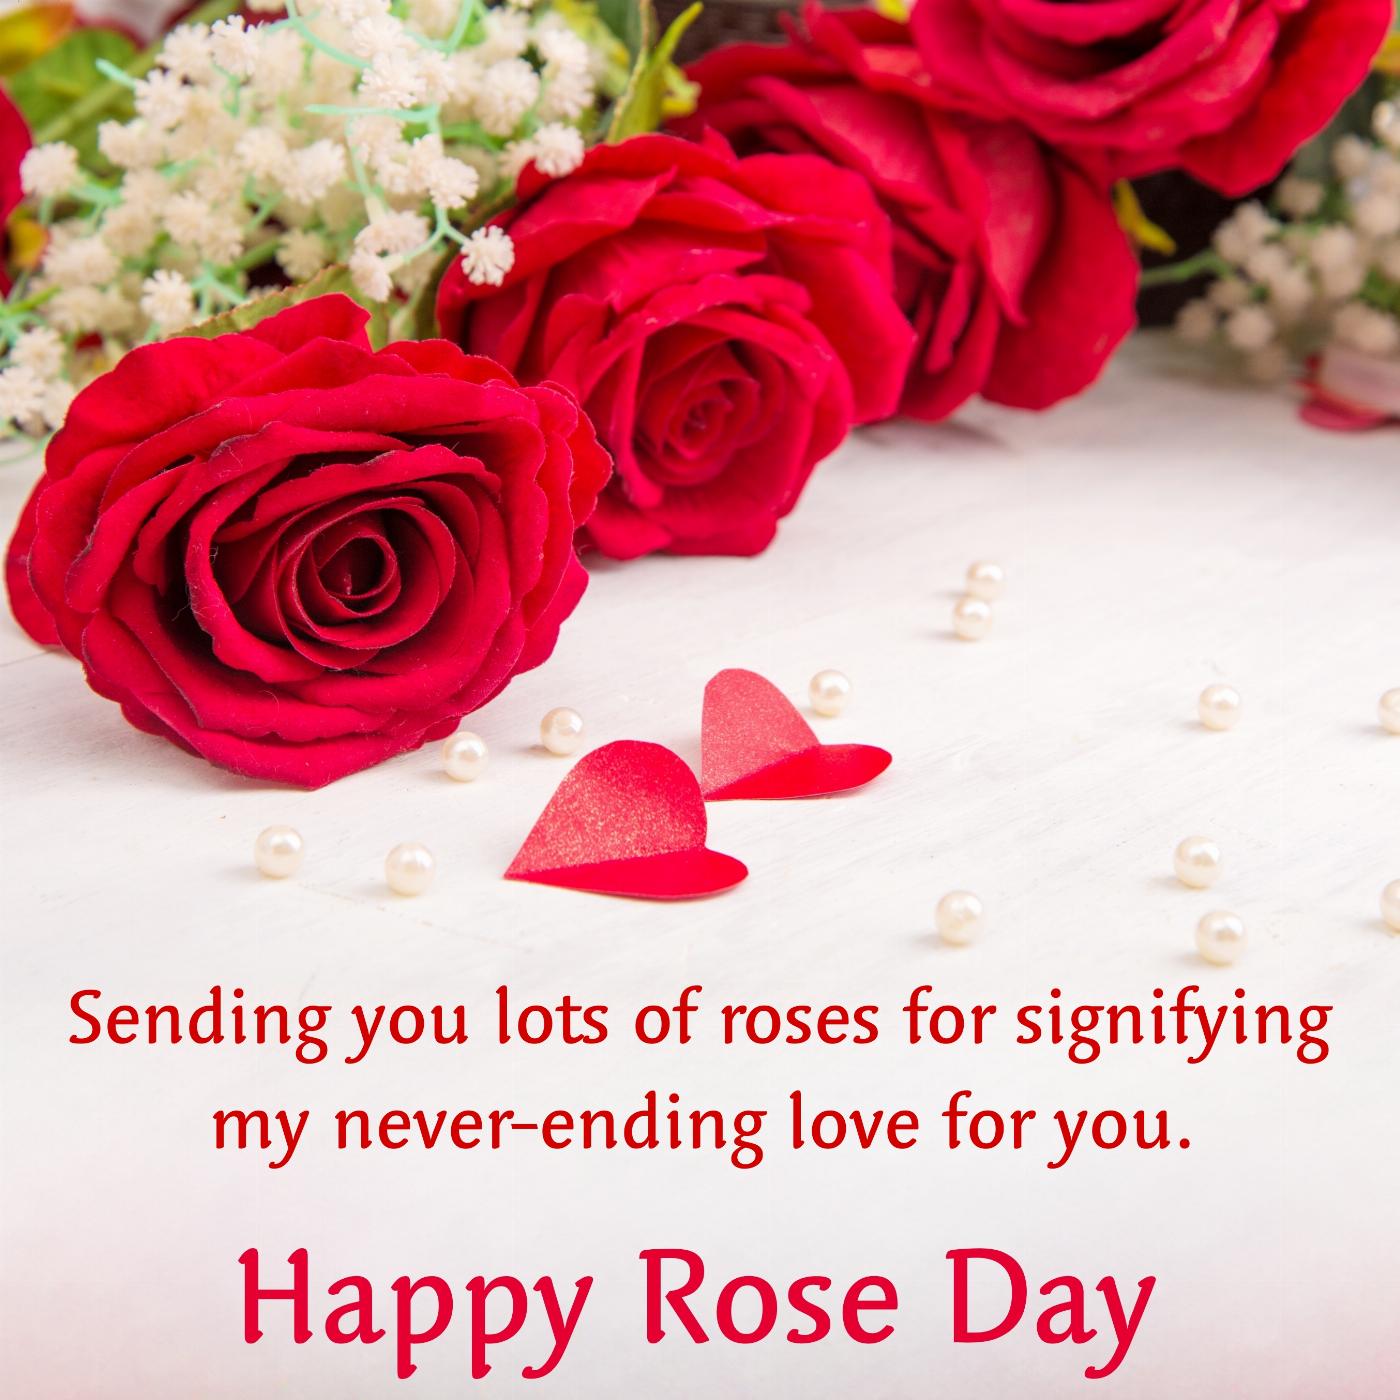 Sending you lots of roses for signifying my never-ending love for you